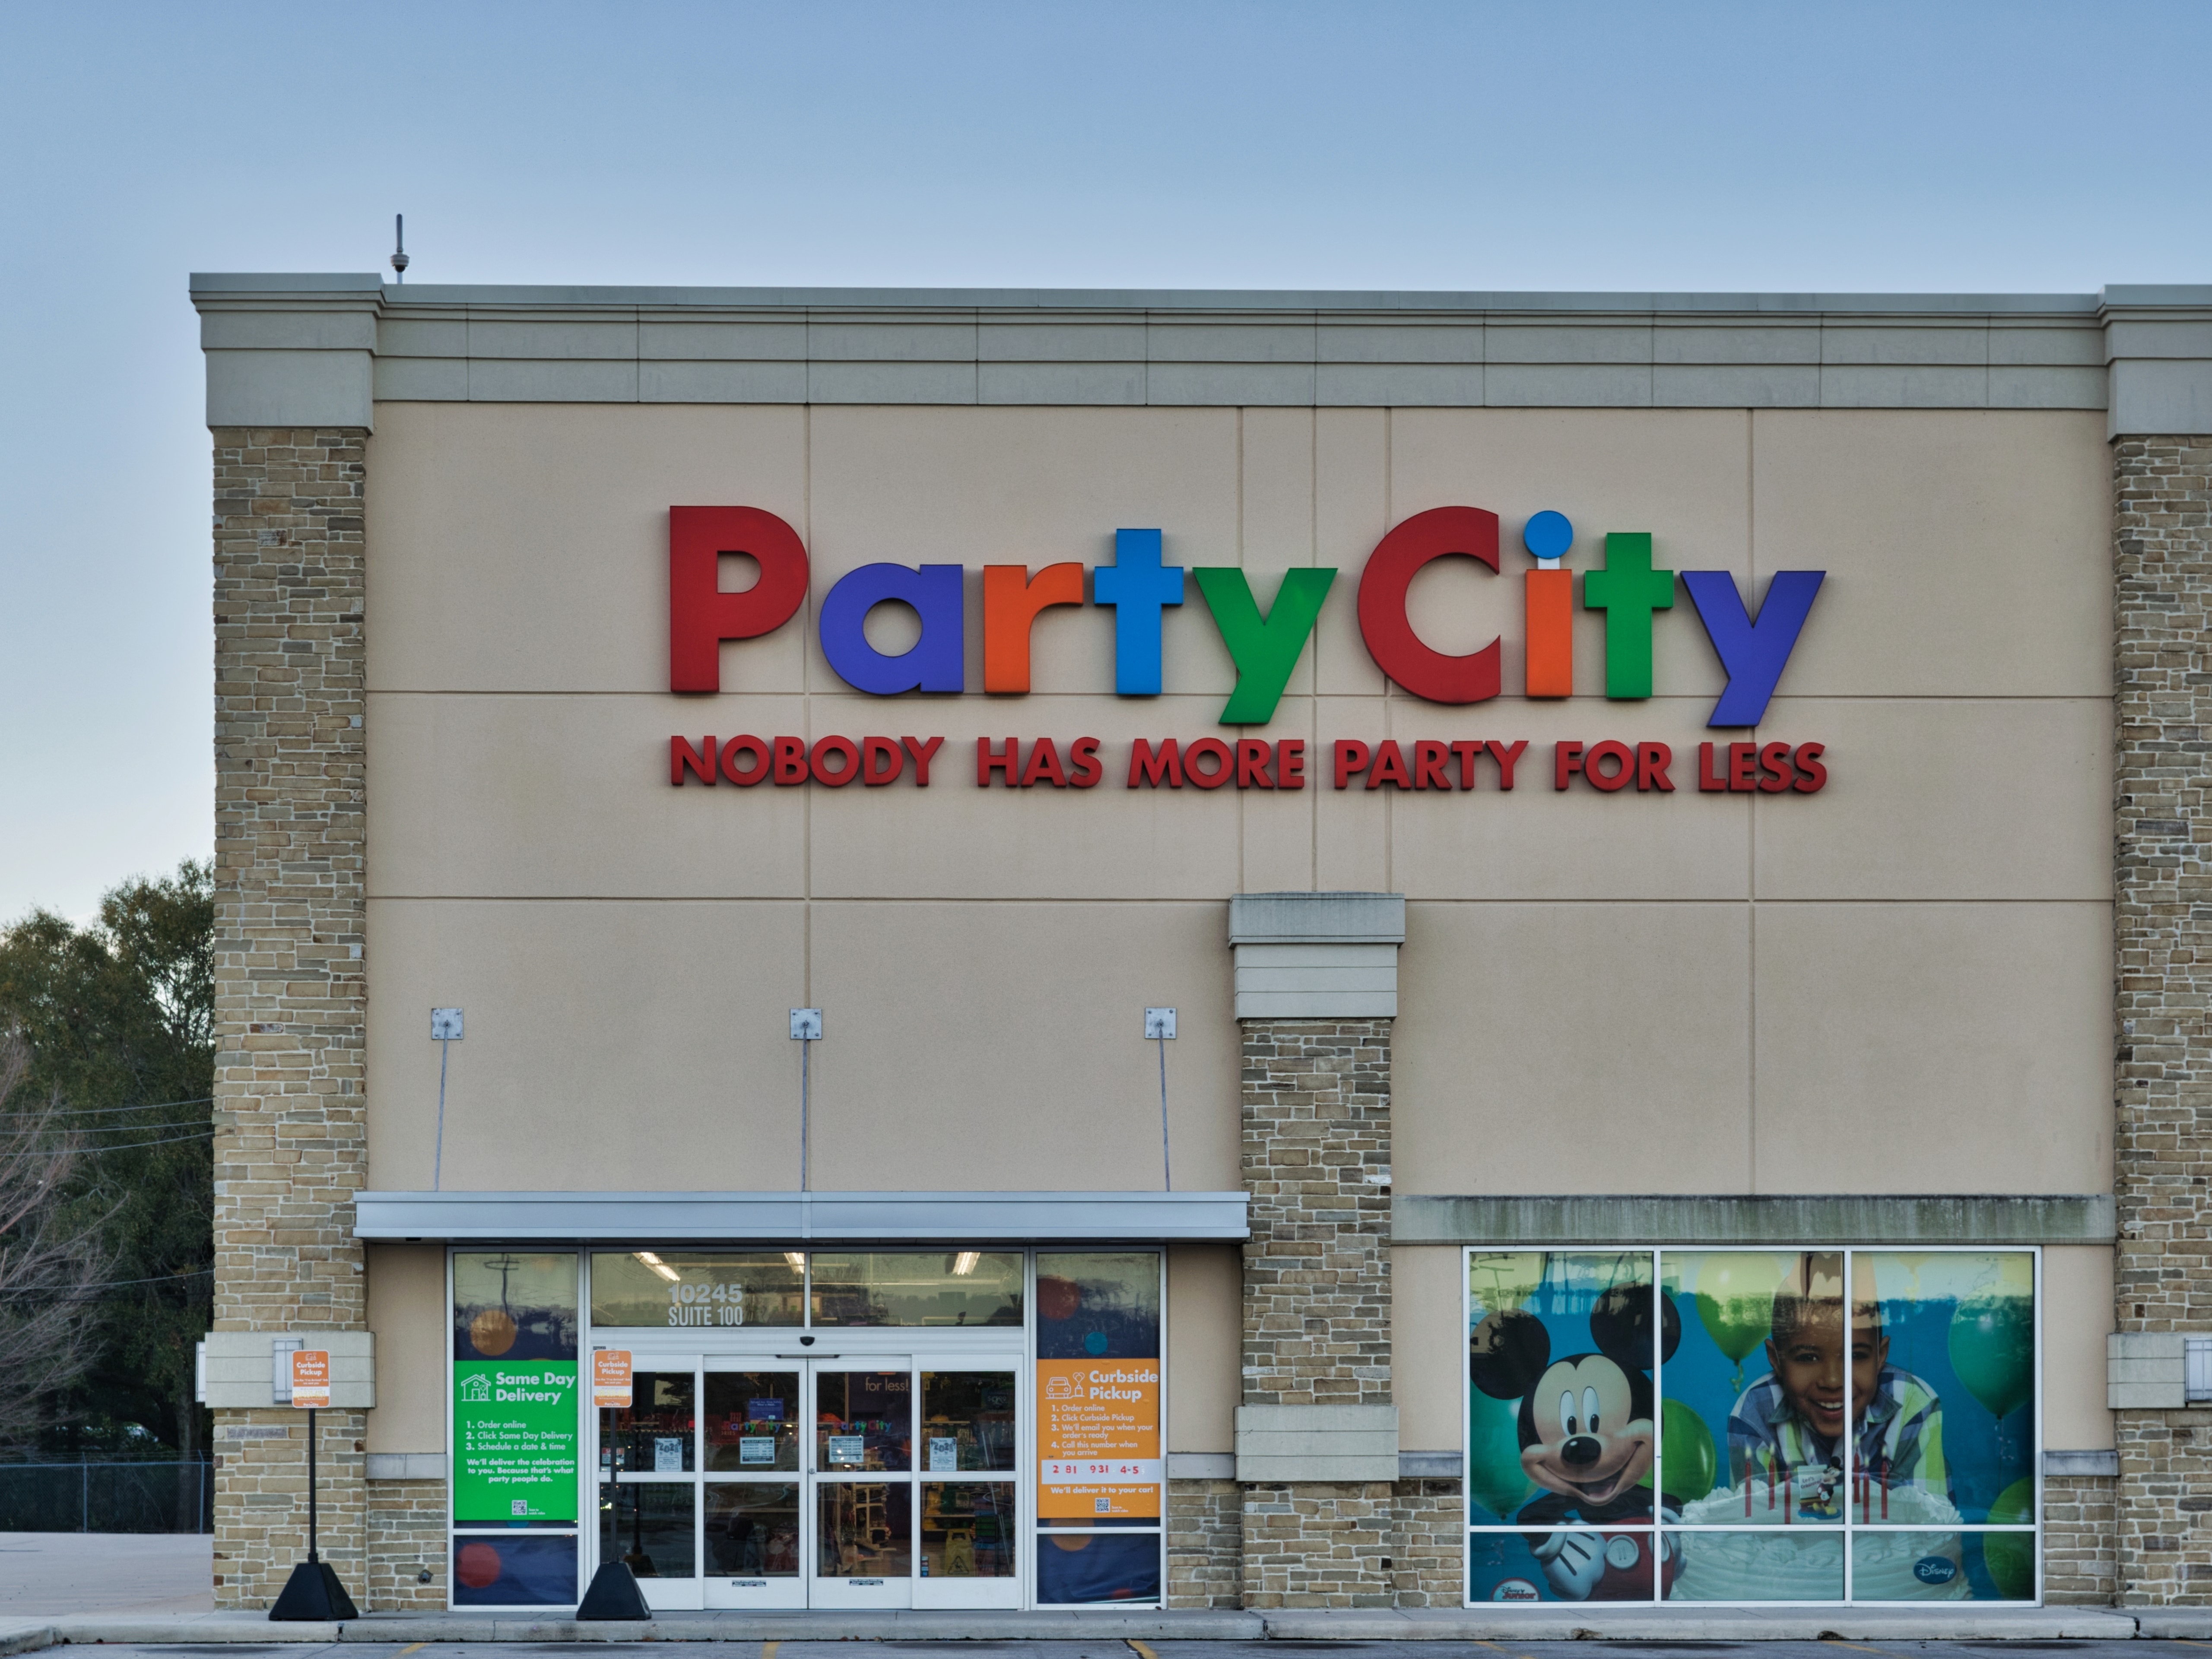 suizo siete y media Alivio Party City - Undervalued 2022 Reopening Play (NYSE:PRTY) | Seeking Alpha